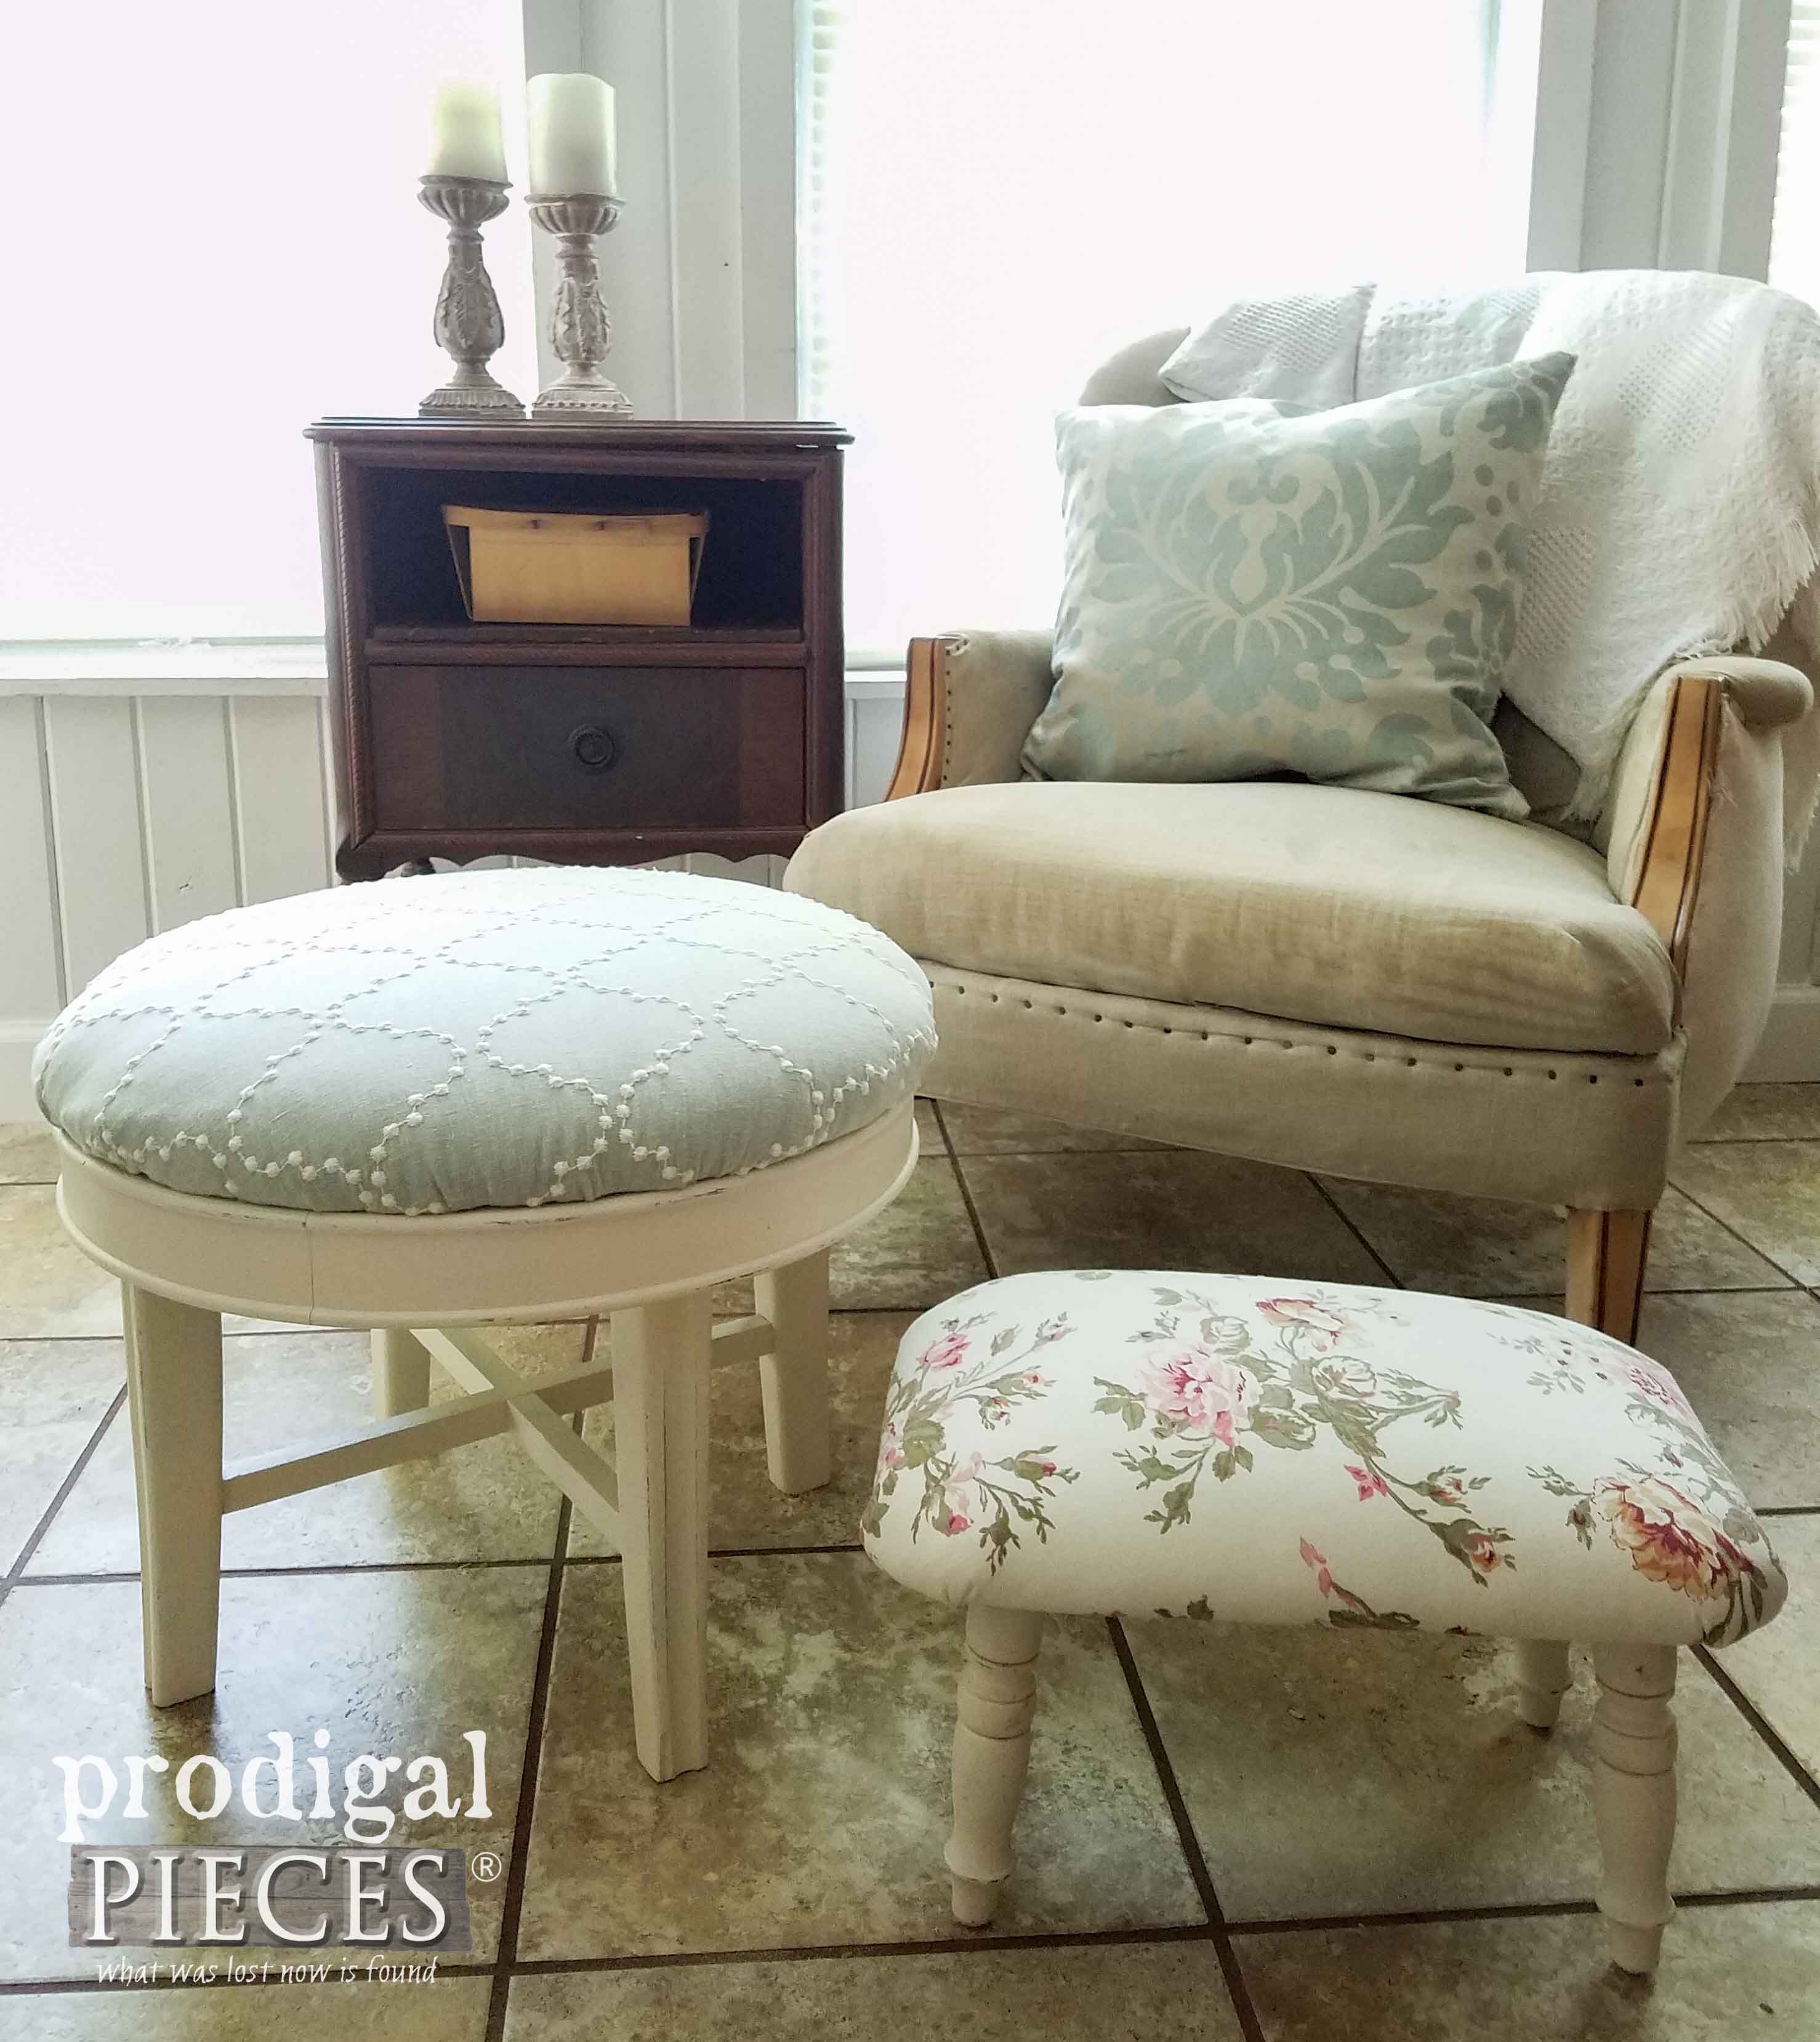 Pair of Vintage Footstools Refreshed with new upholstery and paint by Prodigal Pieces | prodigalpieces.com